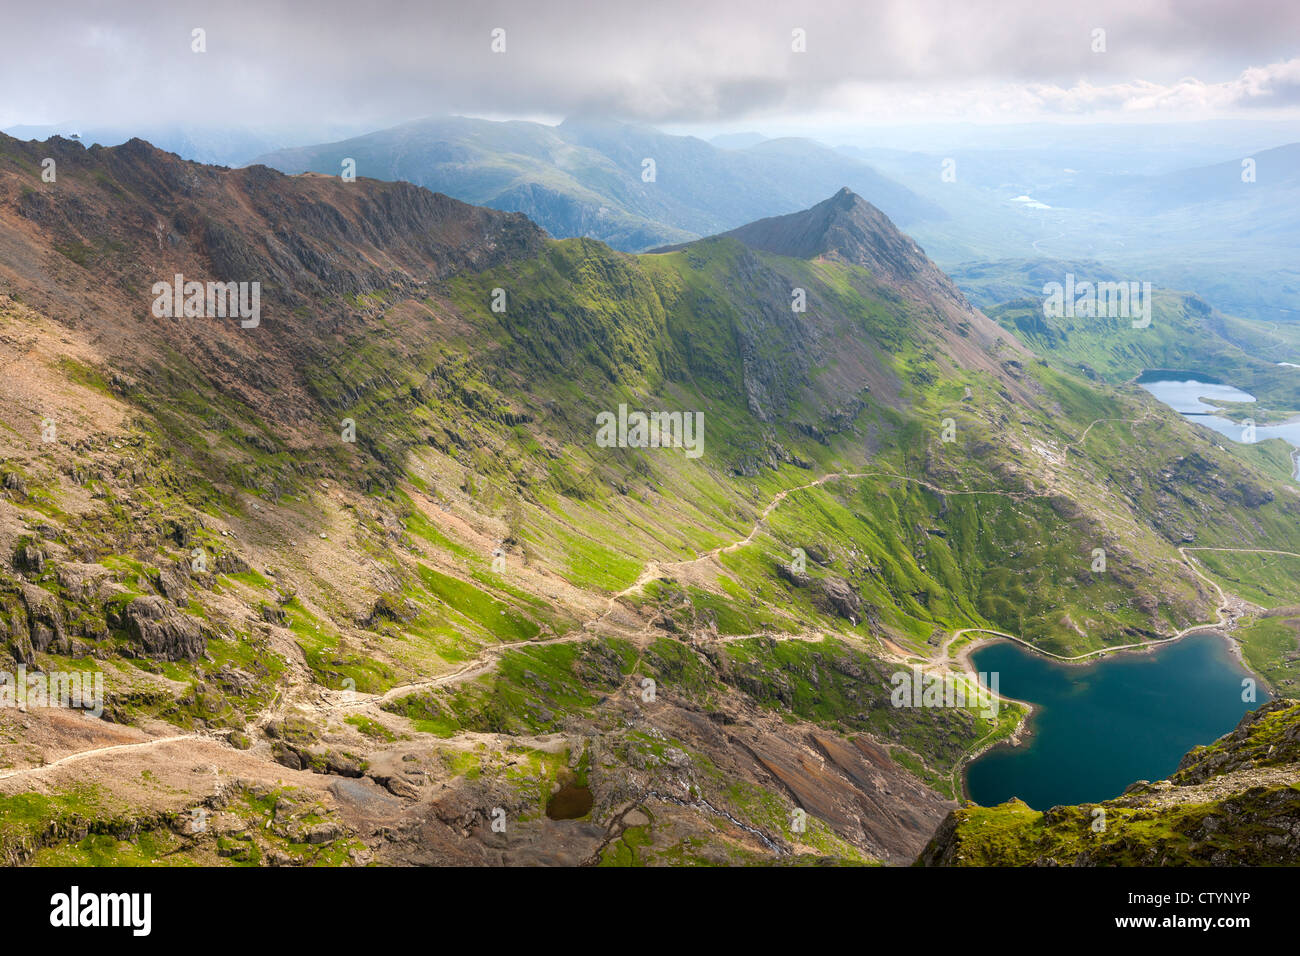 View from Mount Snowdon over Glaslyn and Llyn LLydaw, Snowdonia National Park, Wales Stock Photo